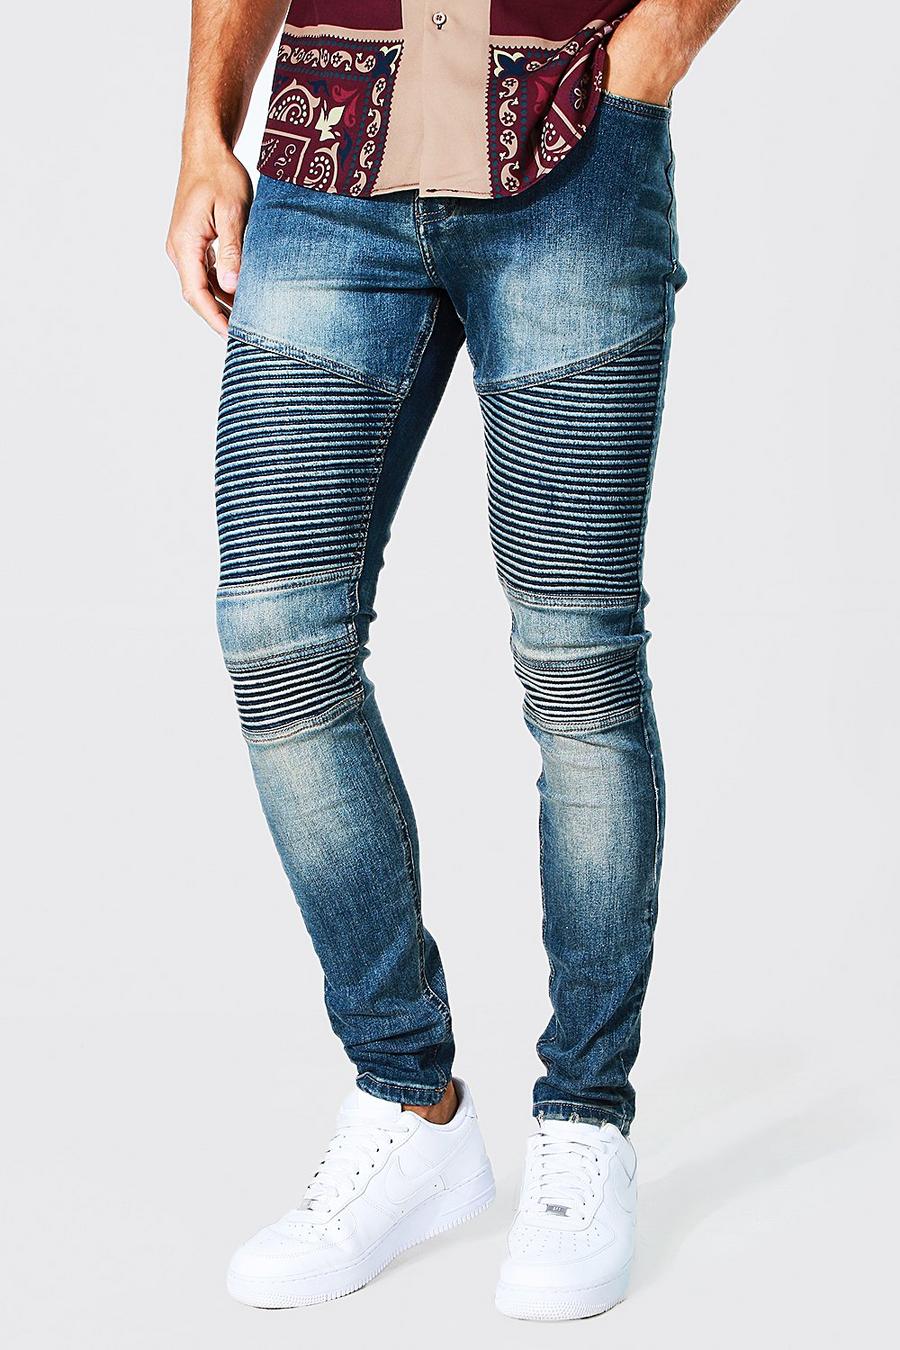 Jeans Tall stile Biker Skinny Fit Stretch con pannelli, Antique blue image number 1